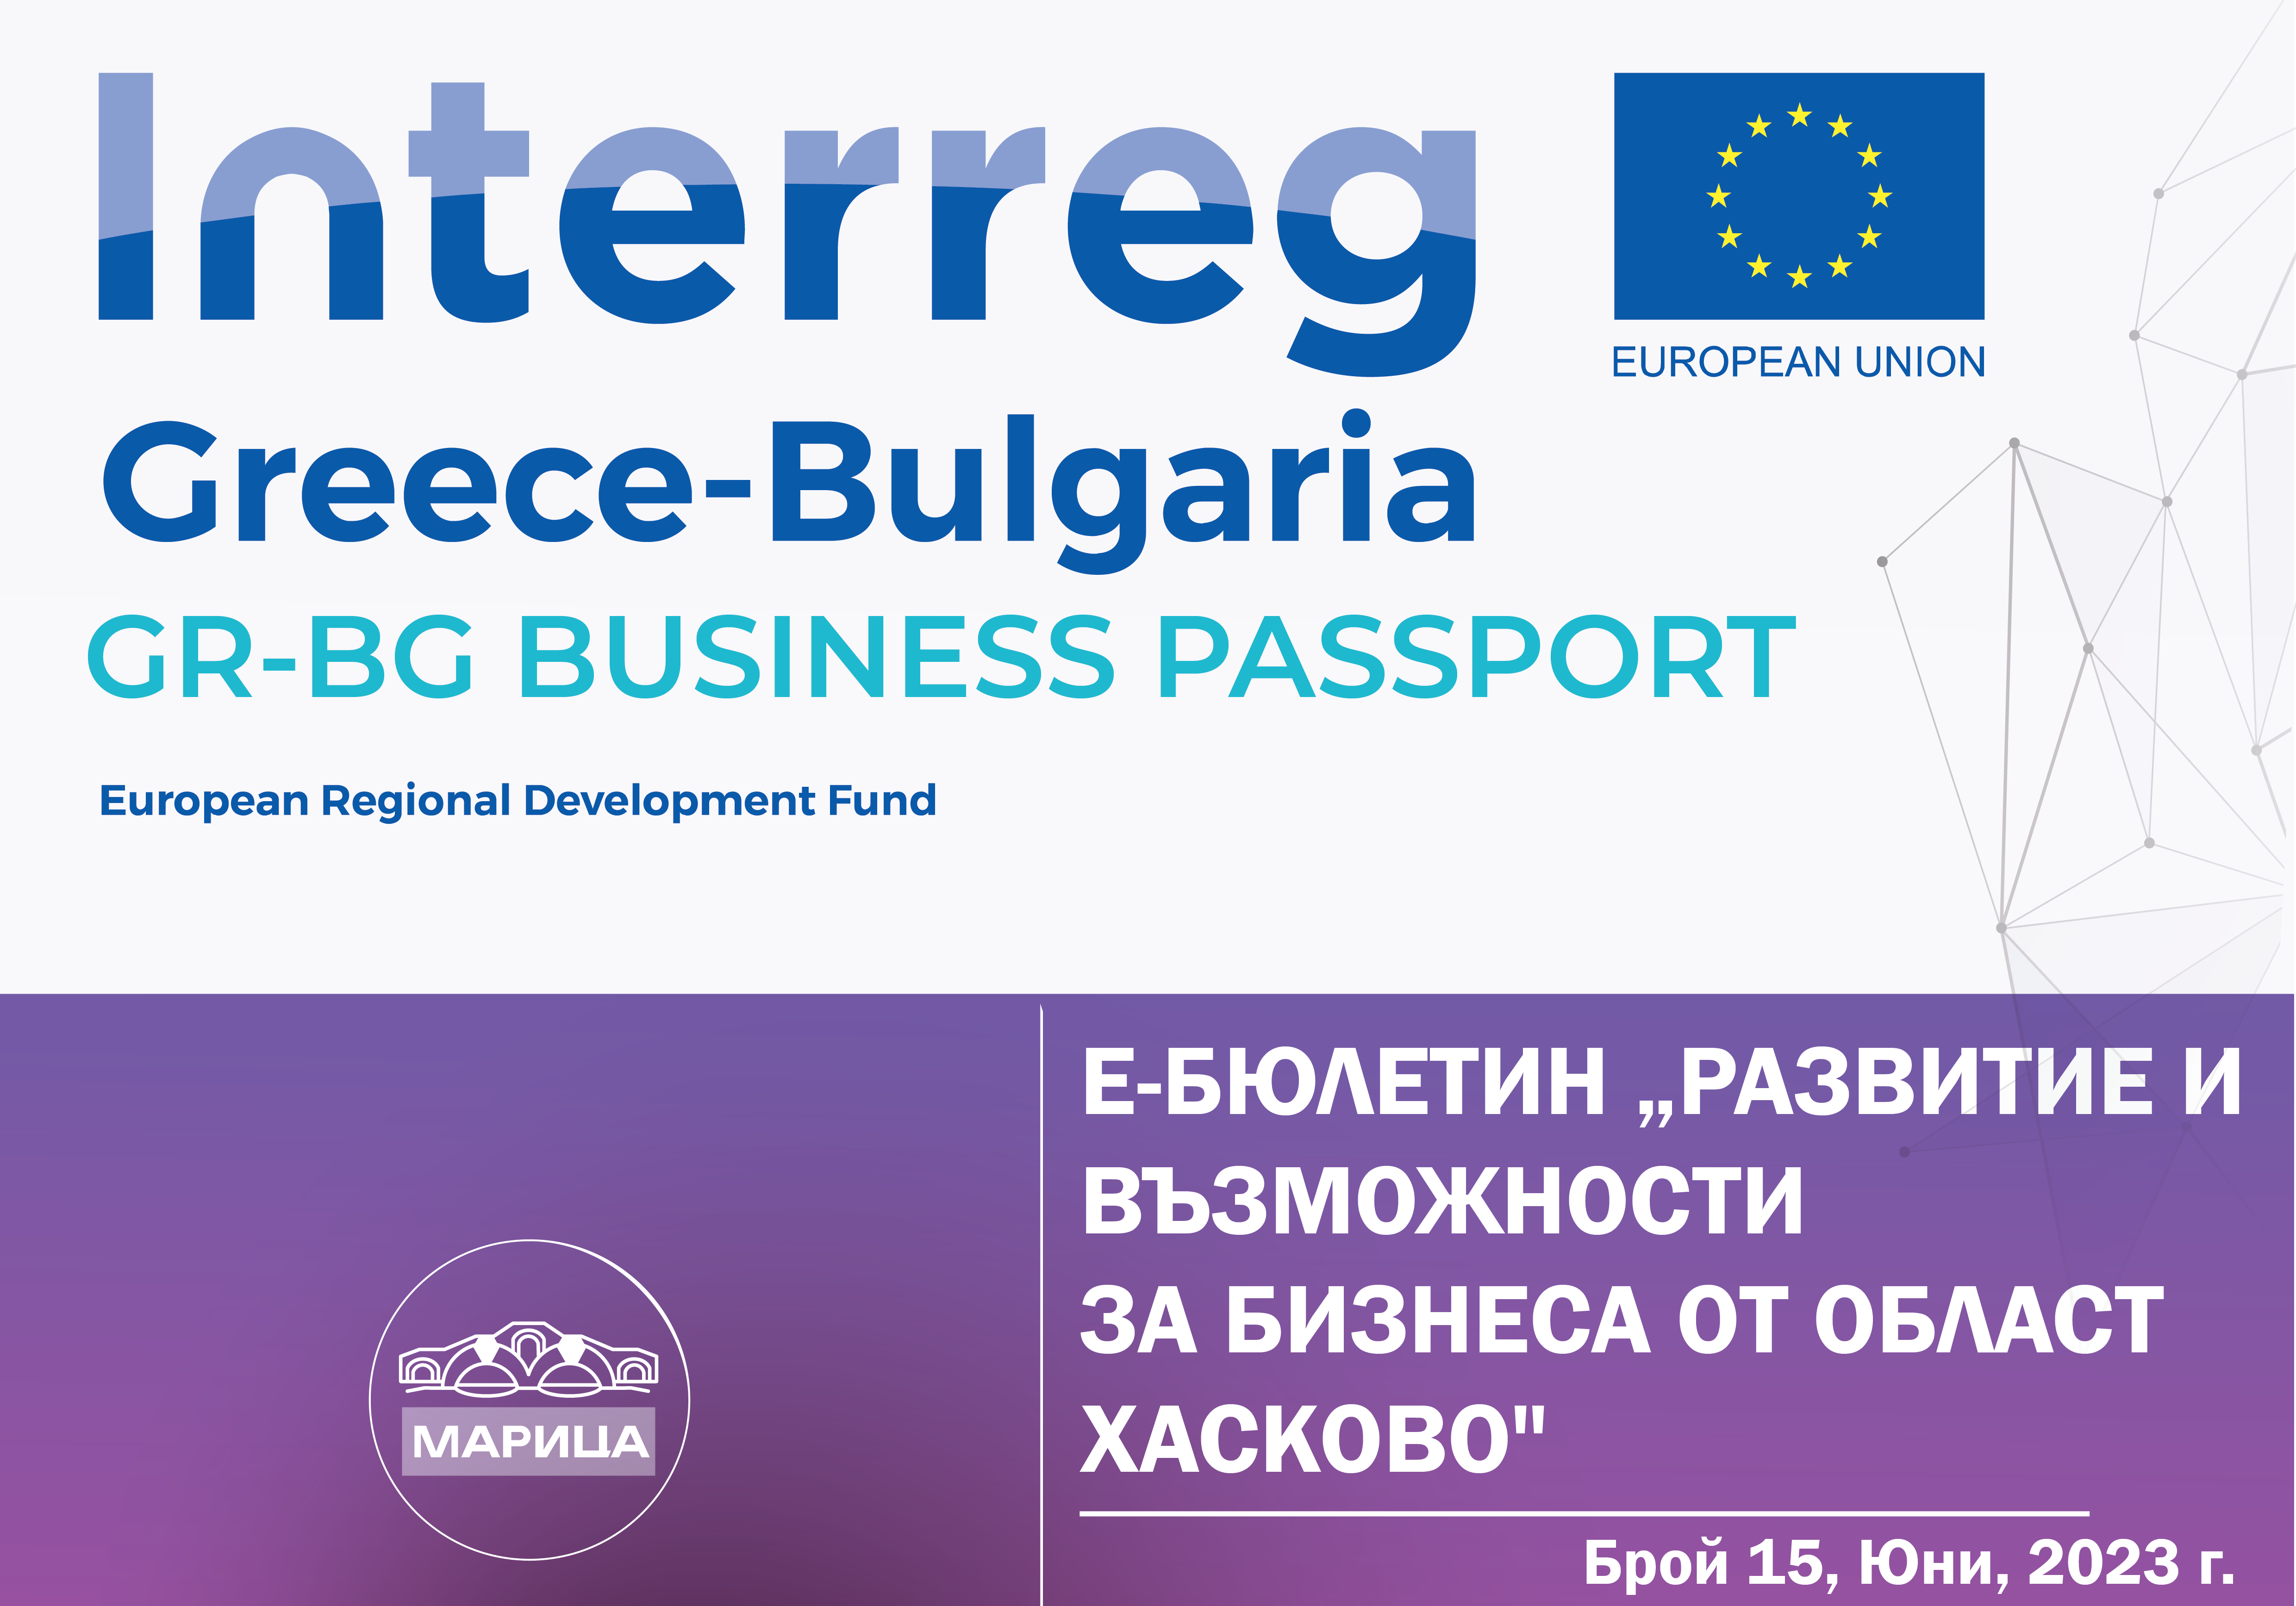 e-newsletter “Development and opportunities for business in the Haskovo region” under a project with the acronym “GR-BG BUSINESS PASSPORT, 15th edition